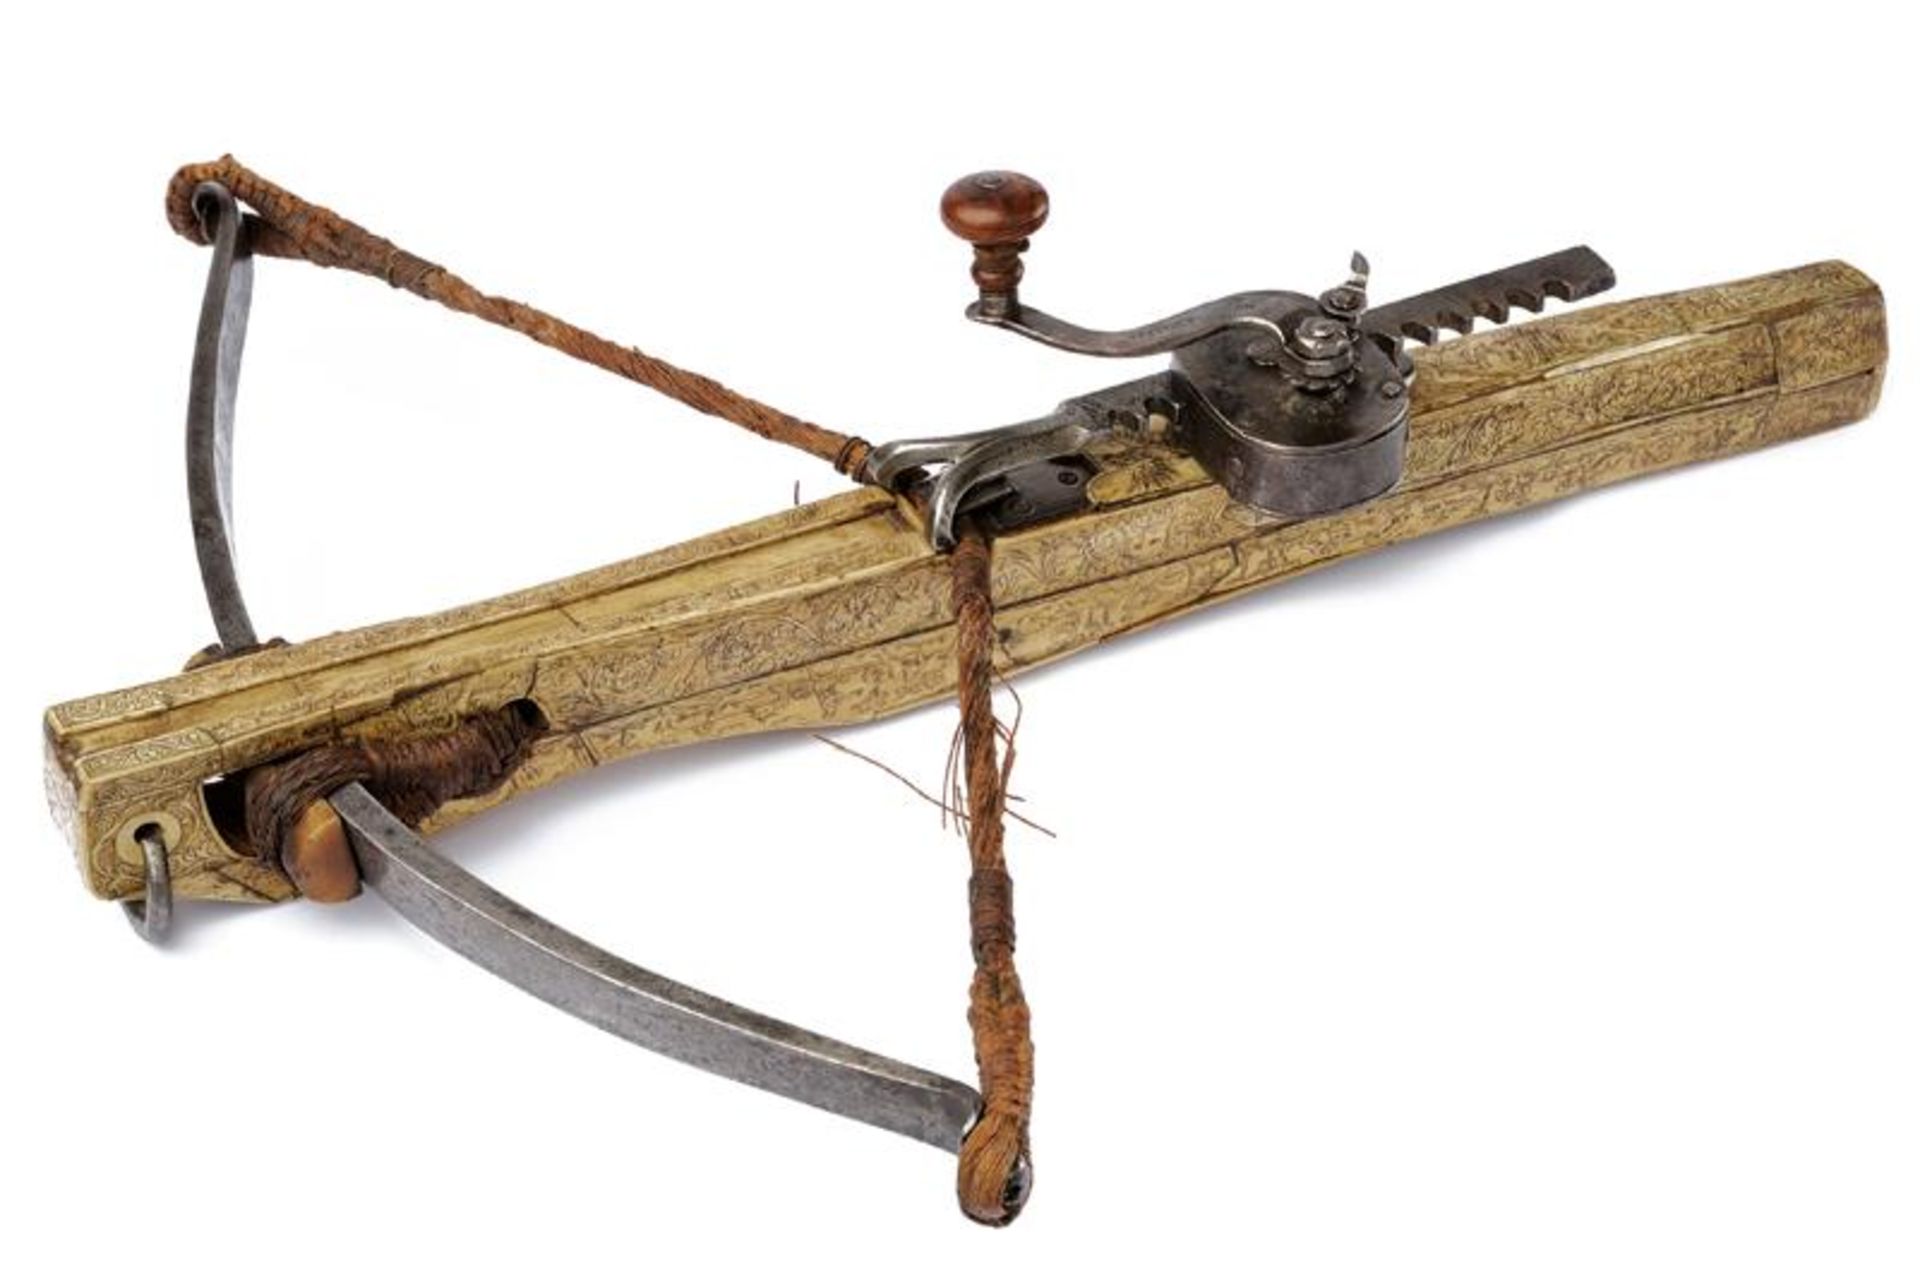 A beautiful engraved crossbow with its windlass